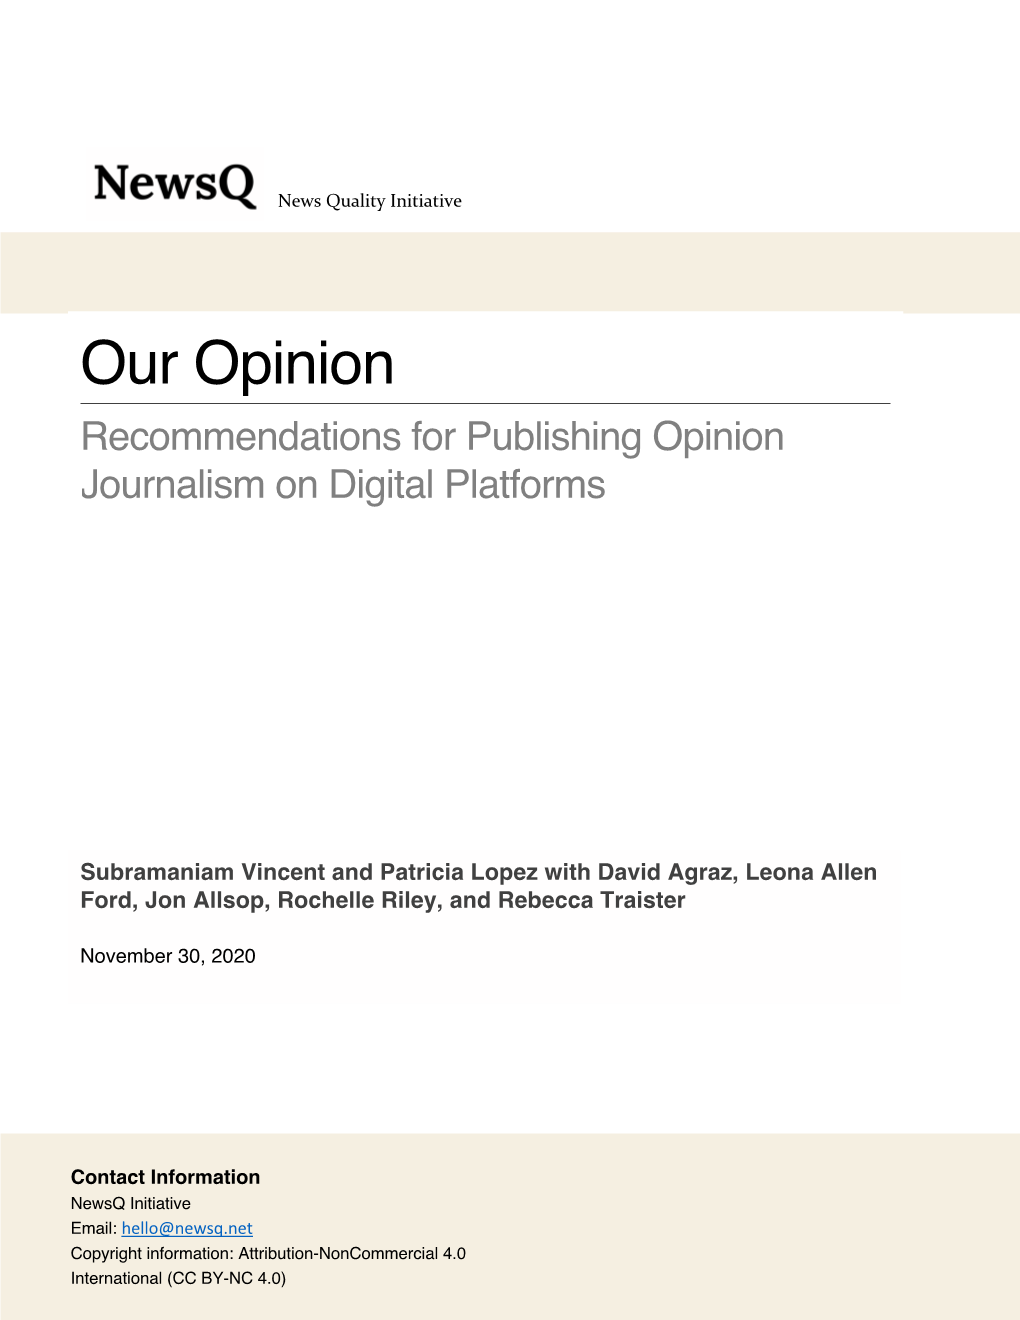 Our Opinion: Recommendations for Publishing Opinion Journalism on Digital Platforms